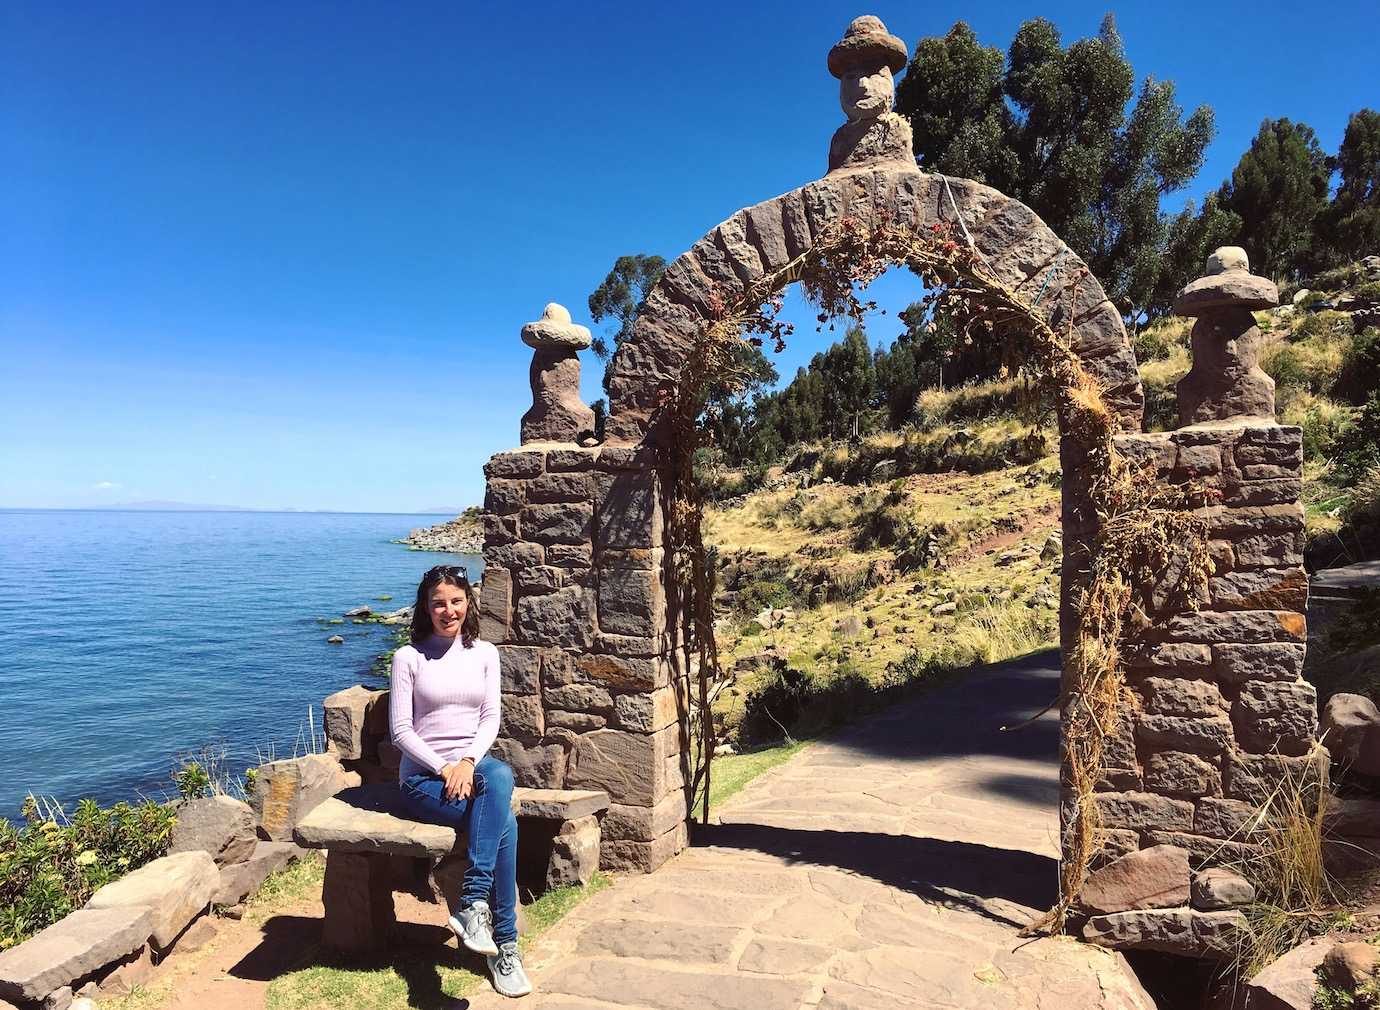 A Peruvian and Bolivian Overview of Lake Titicaca